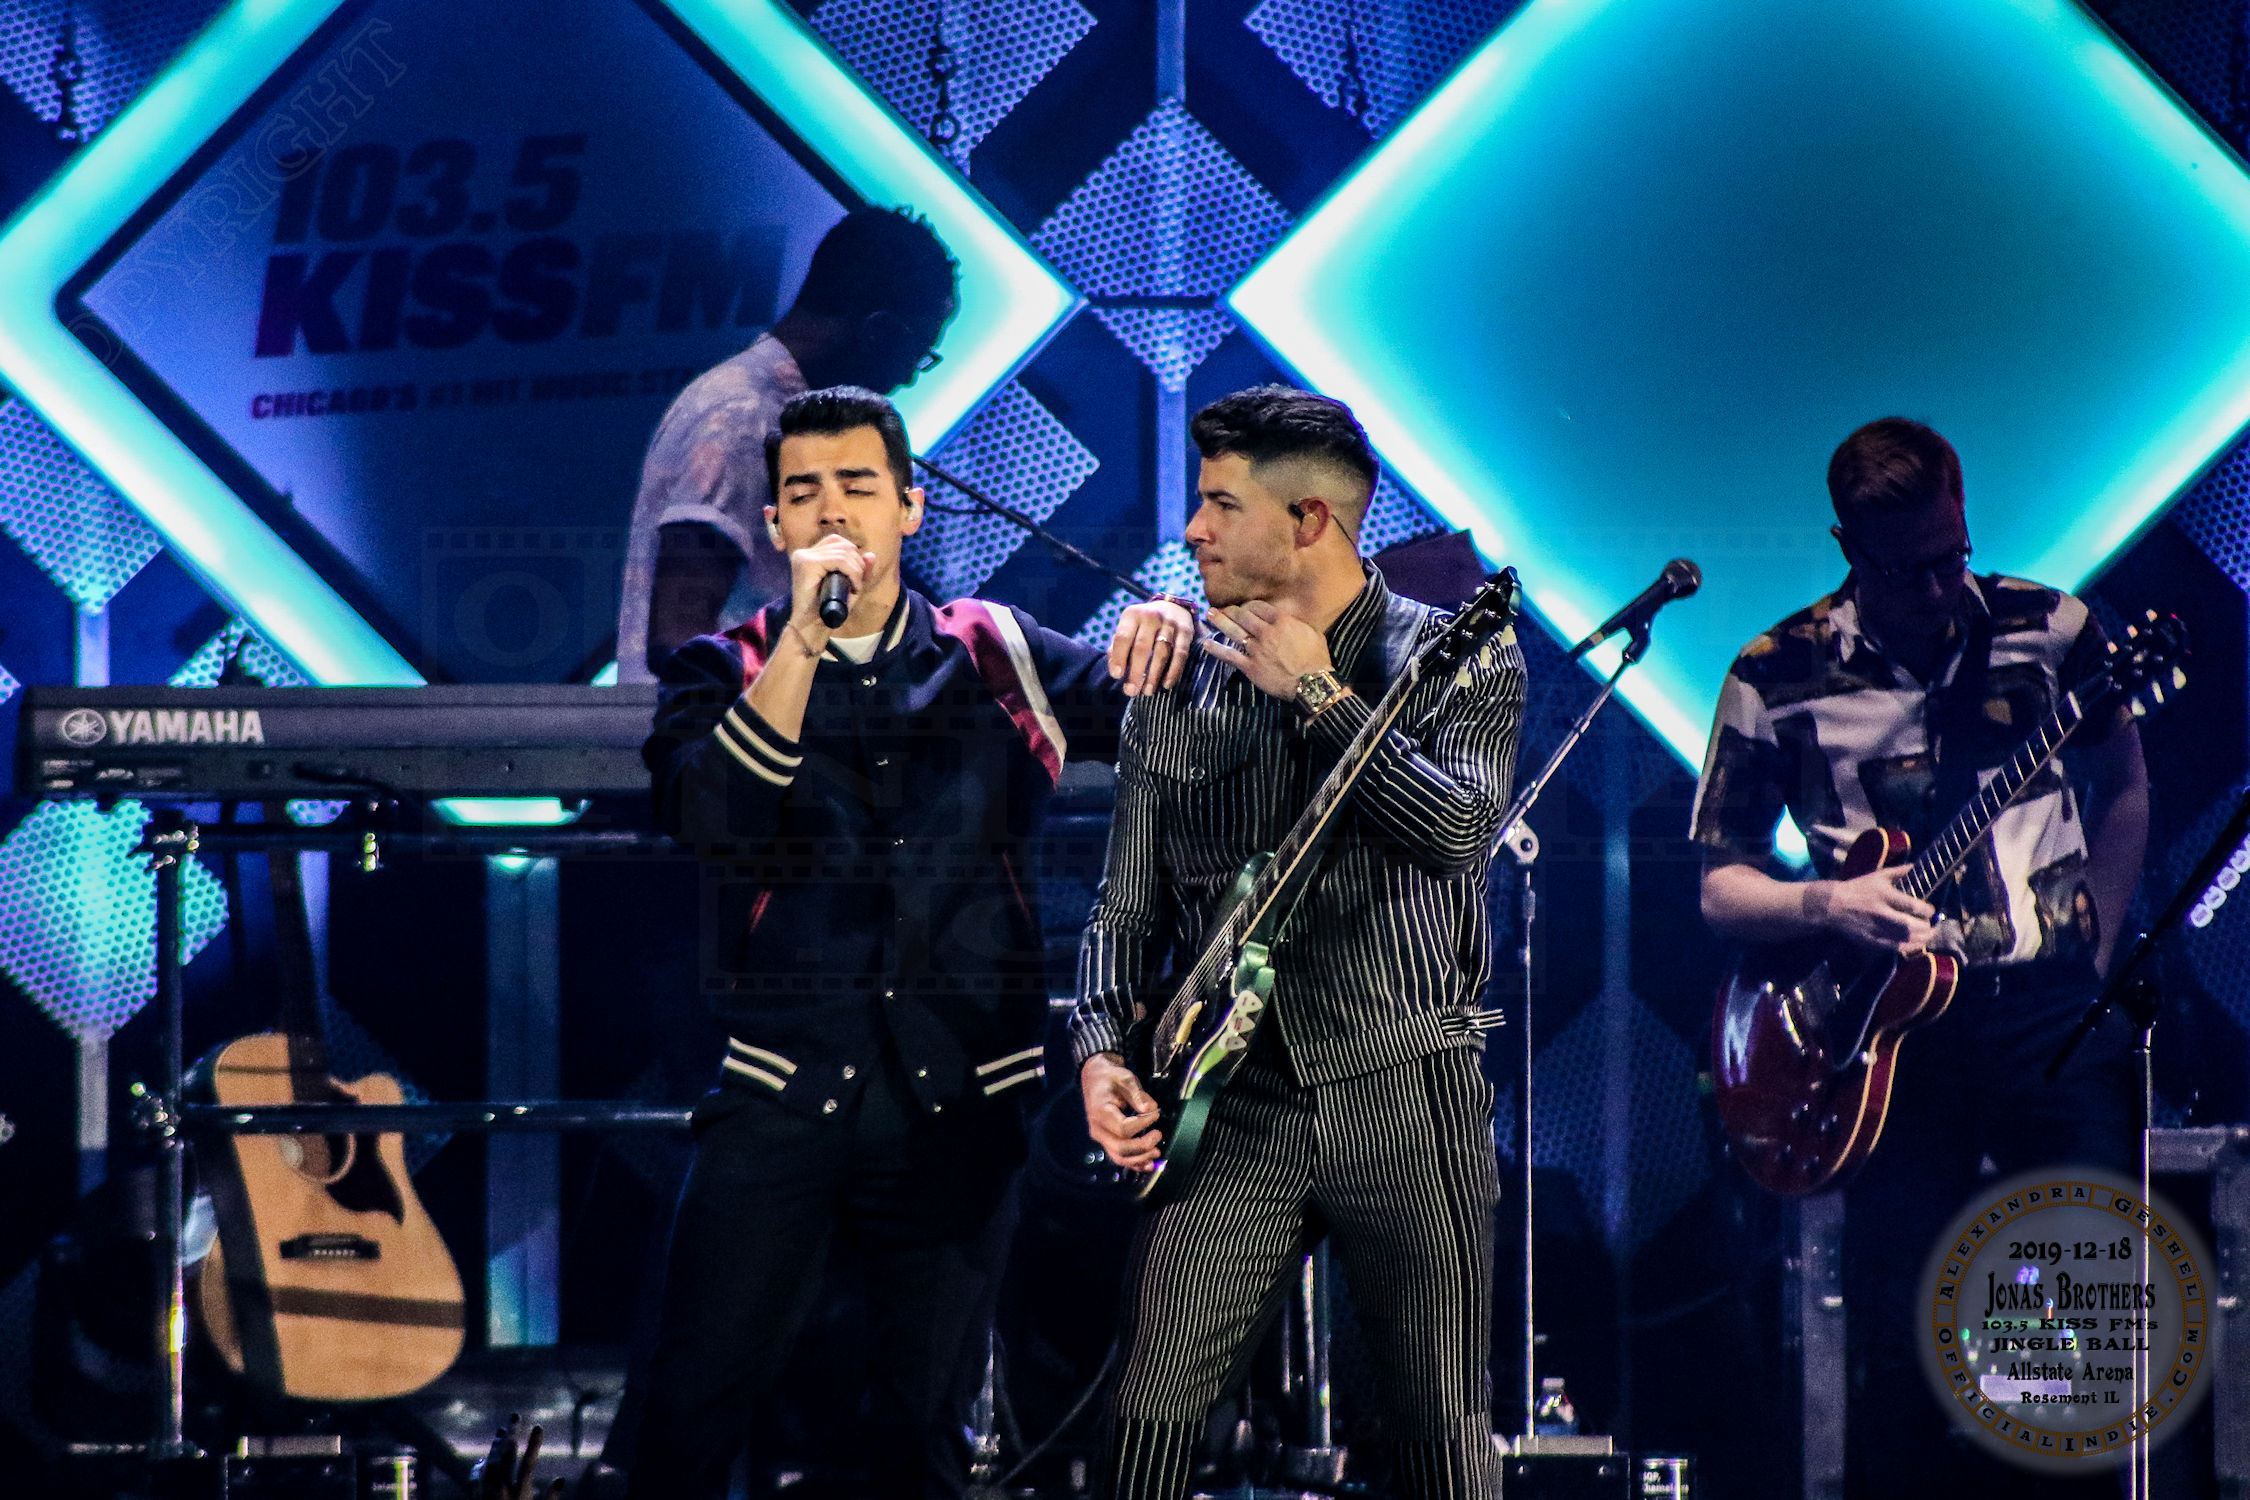 The Jonas Brothers' Summerfest performance ensures fans will